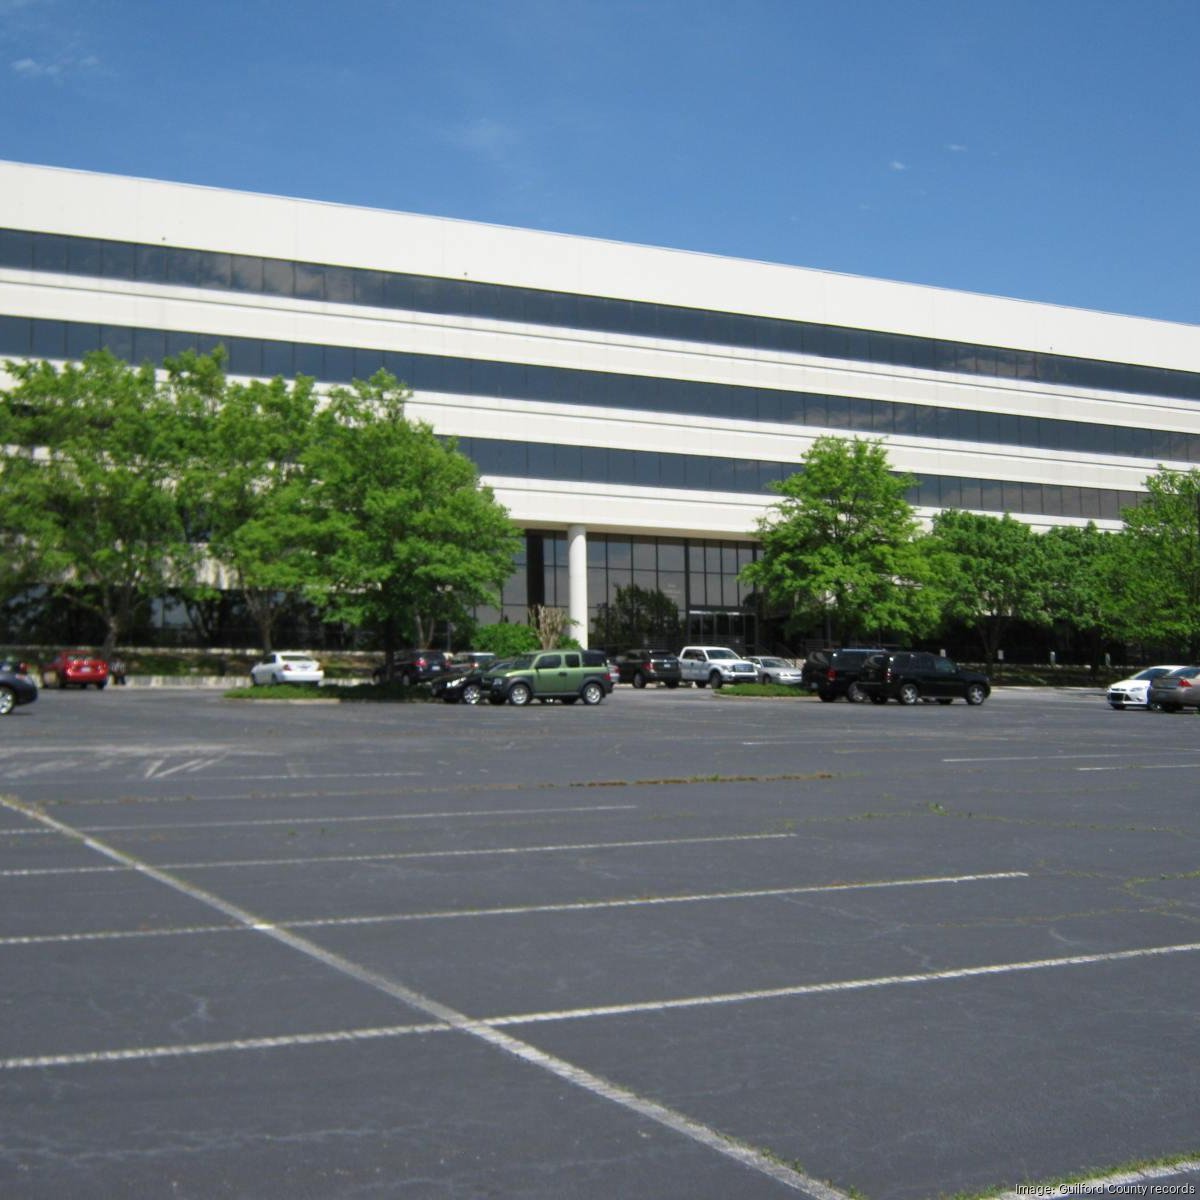 Toyota subleases large space in former LabCorp building in